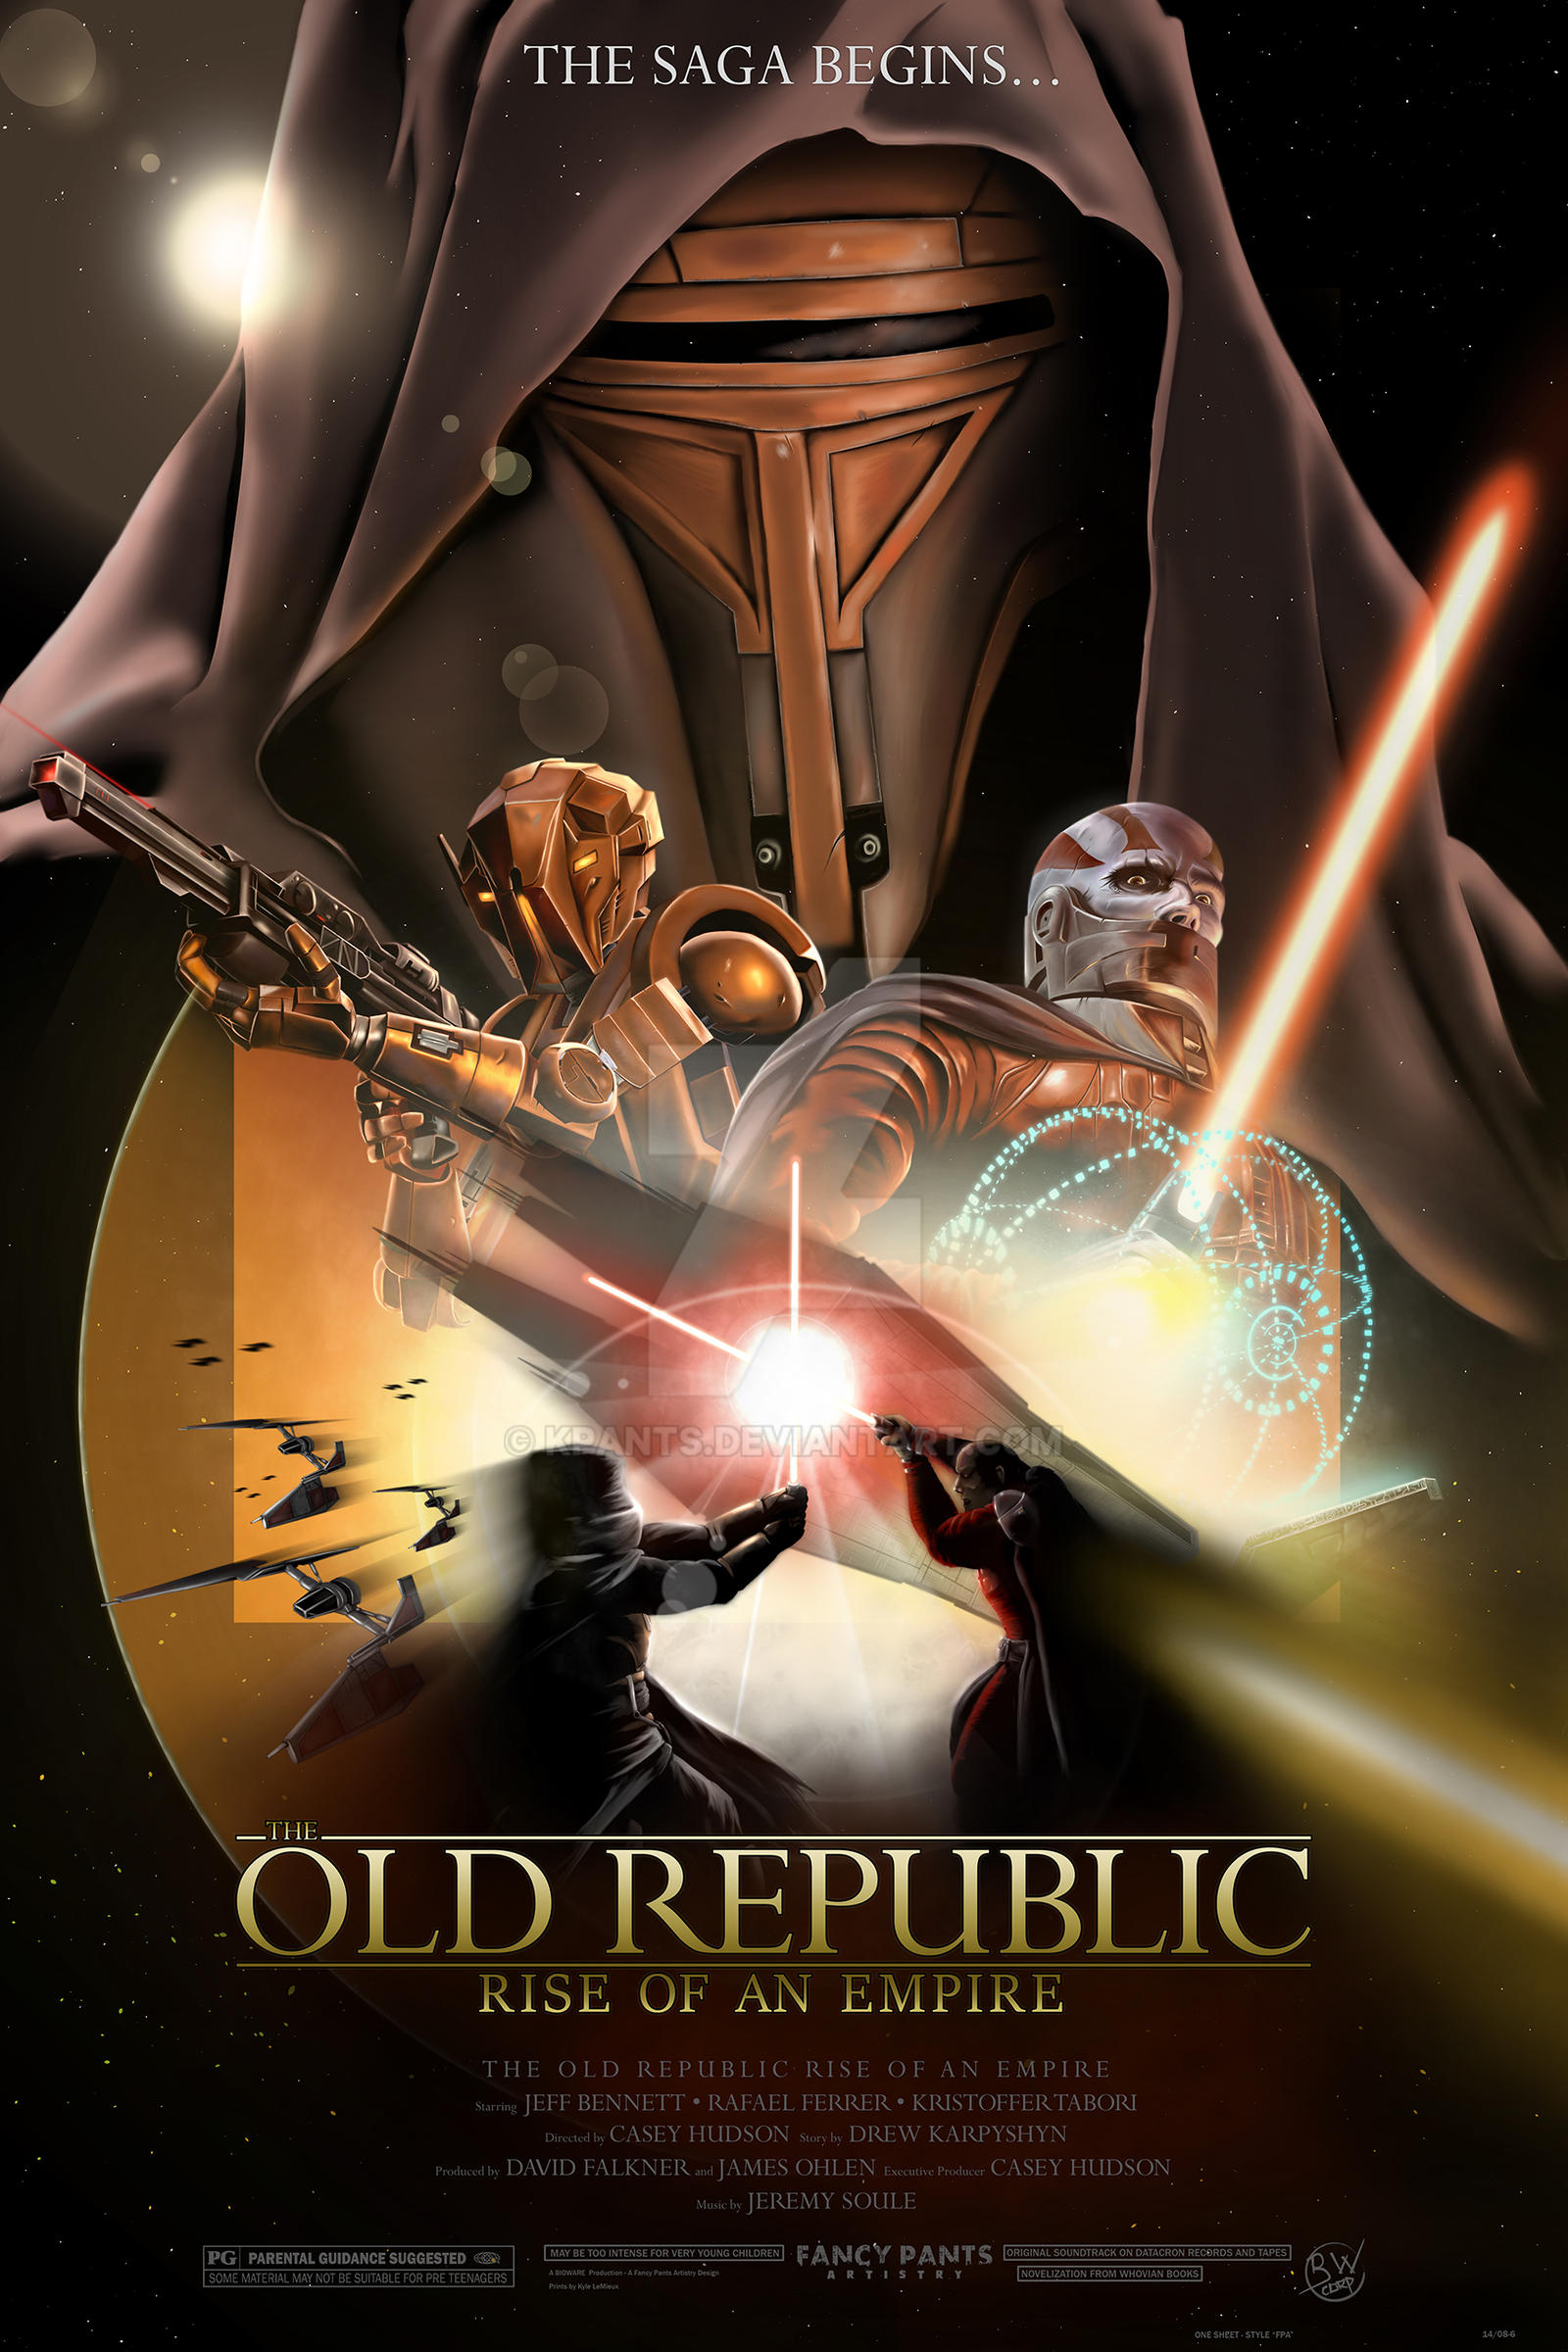 the_old_republic___rise_of_an_empire_by_kpants-d7ljkuv.jpg